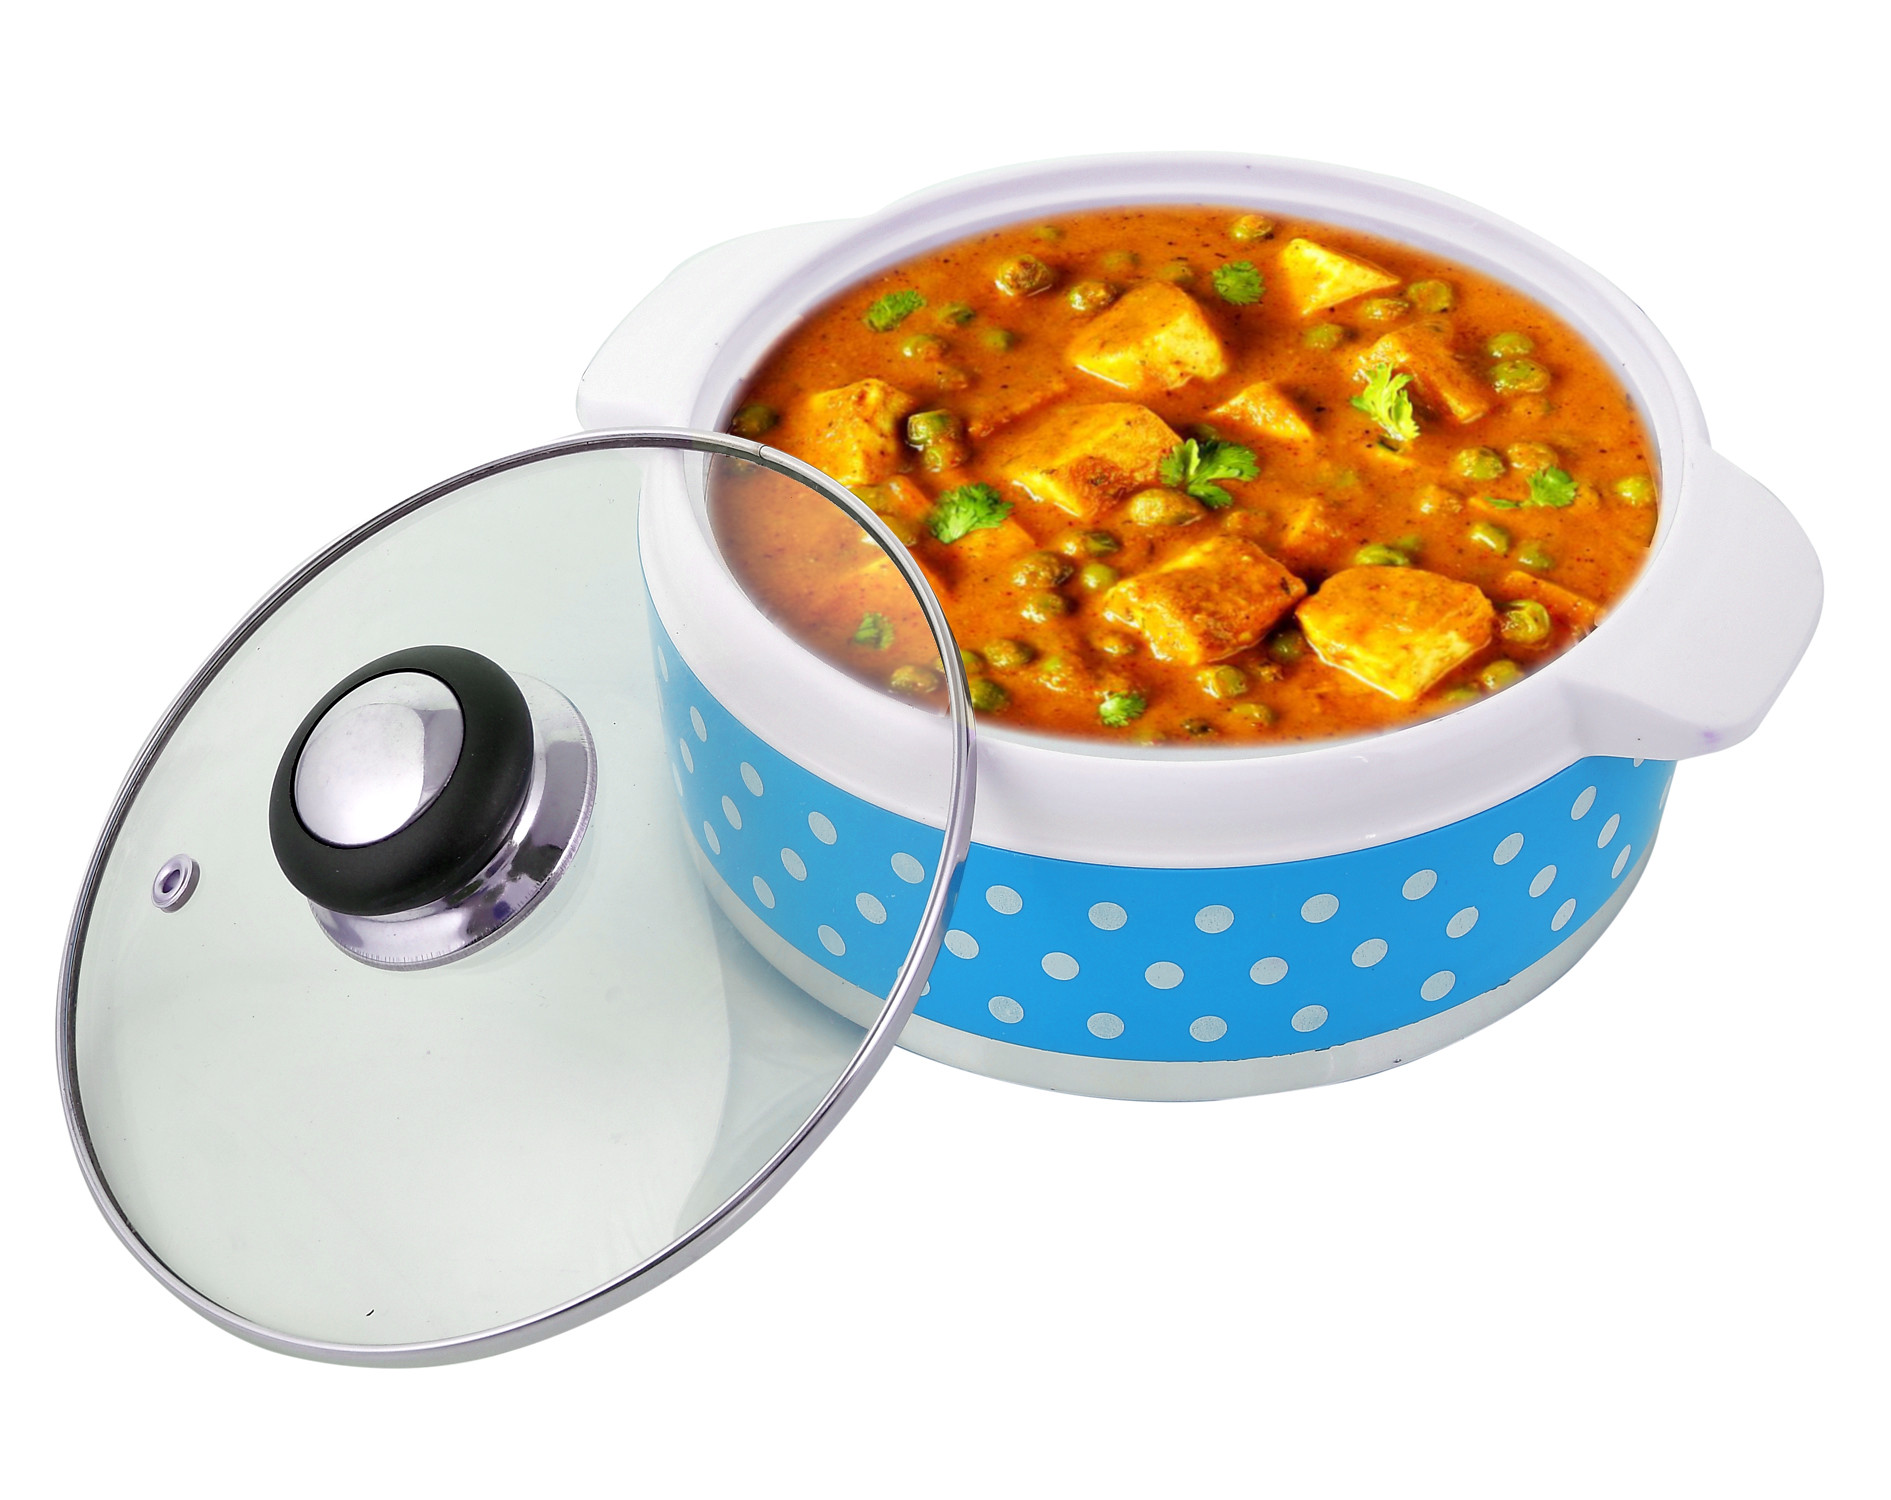 Kuber Industries Dot Printed Inner Steel Casserole With Toughened Glass Lid, 1500ml (Blue)-HS42KUBMART25009